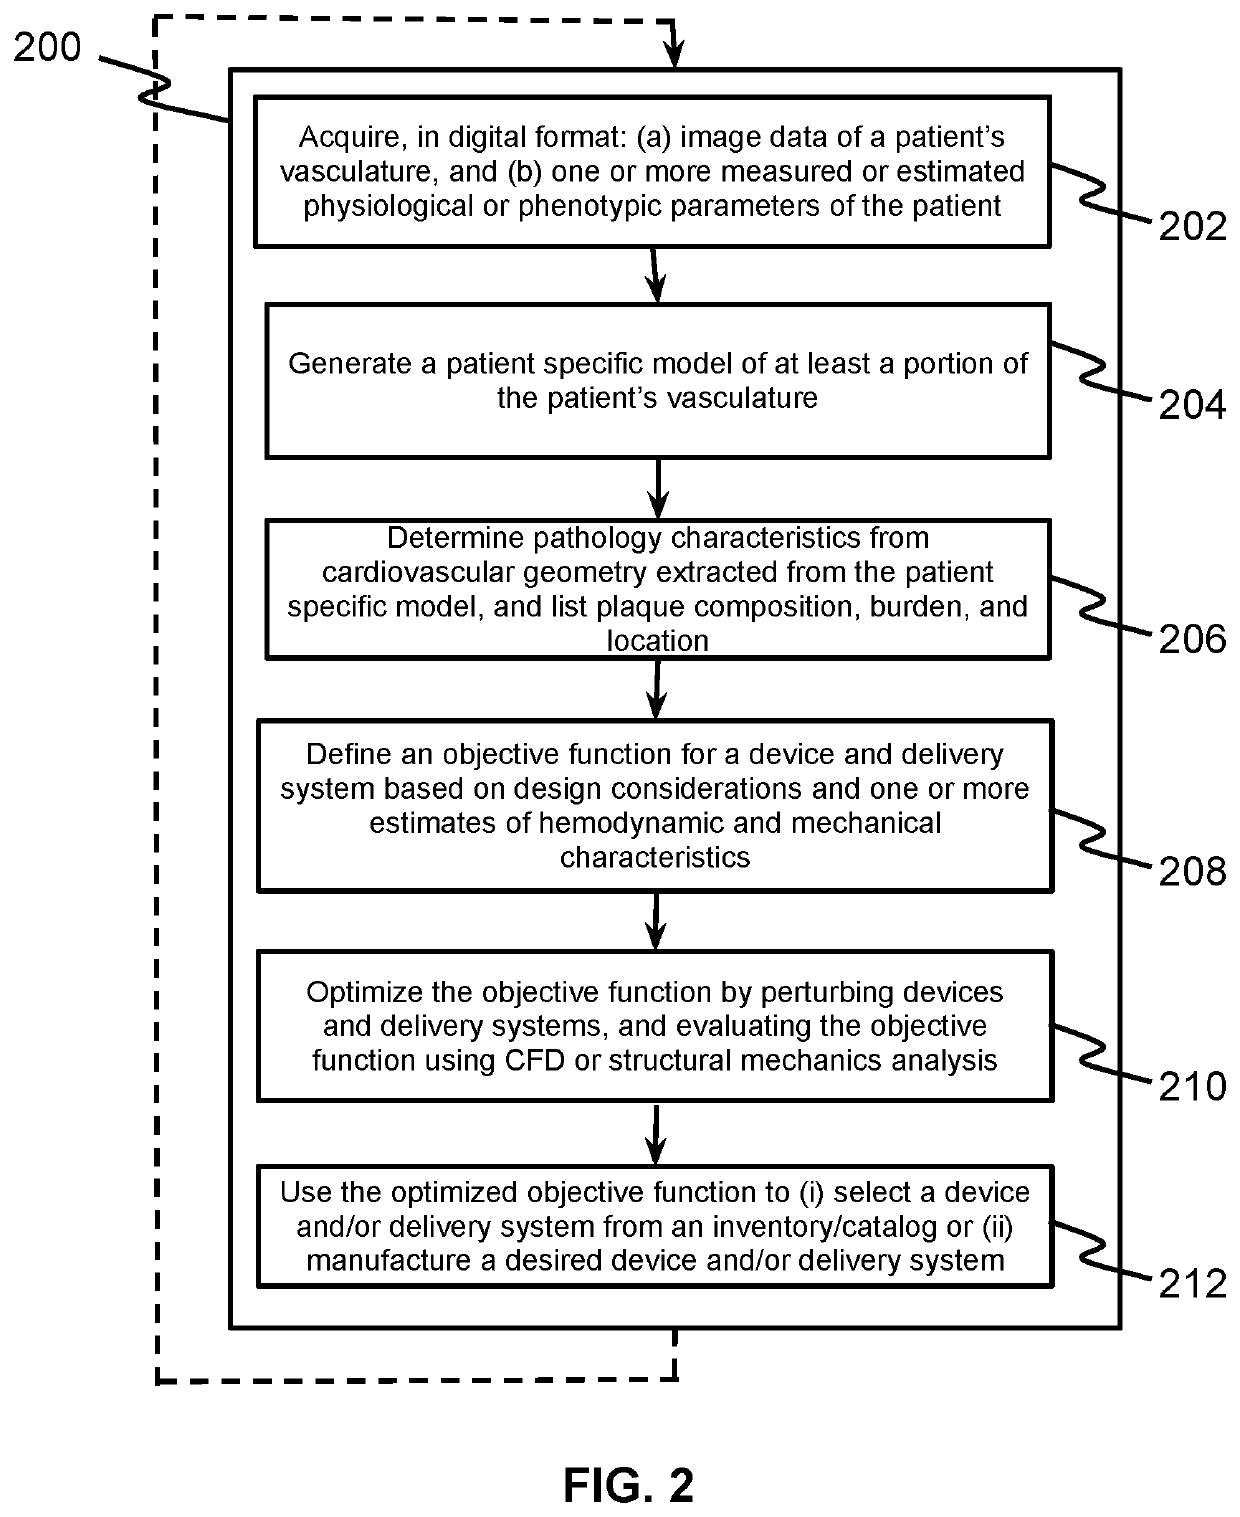 Systems and methods for identifying personalized vascular implants from patient-specific anatomic data